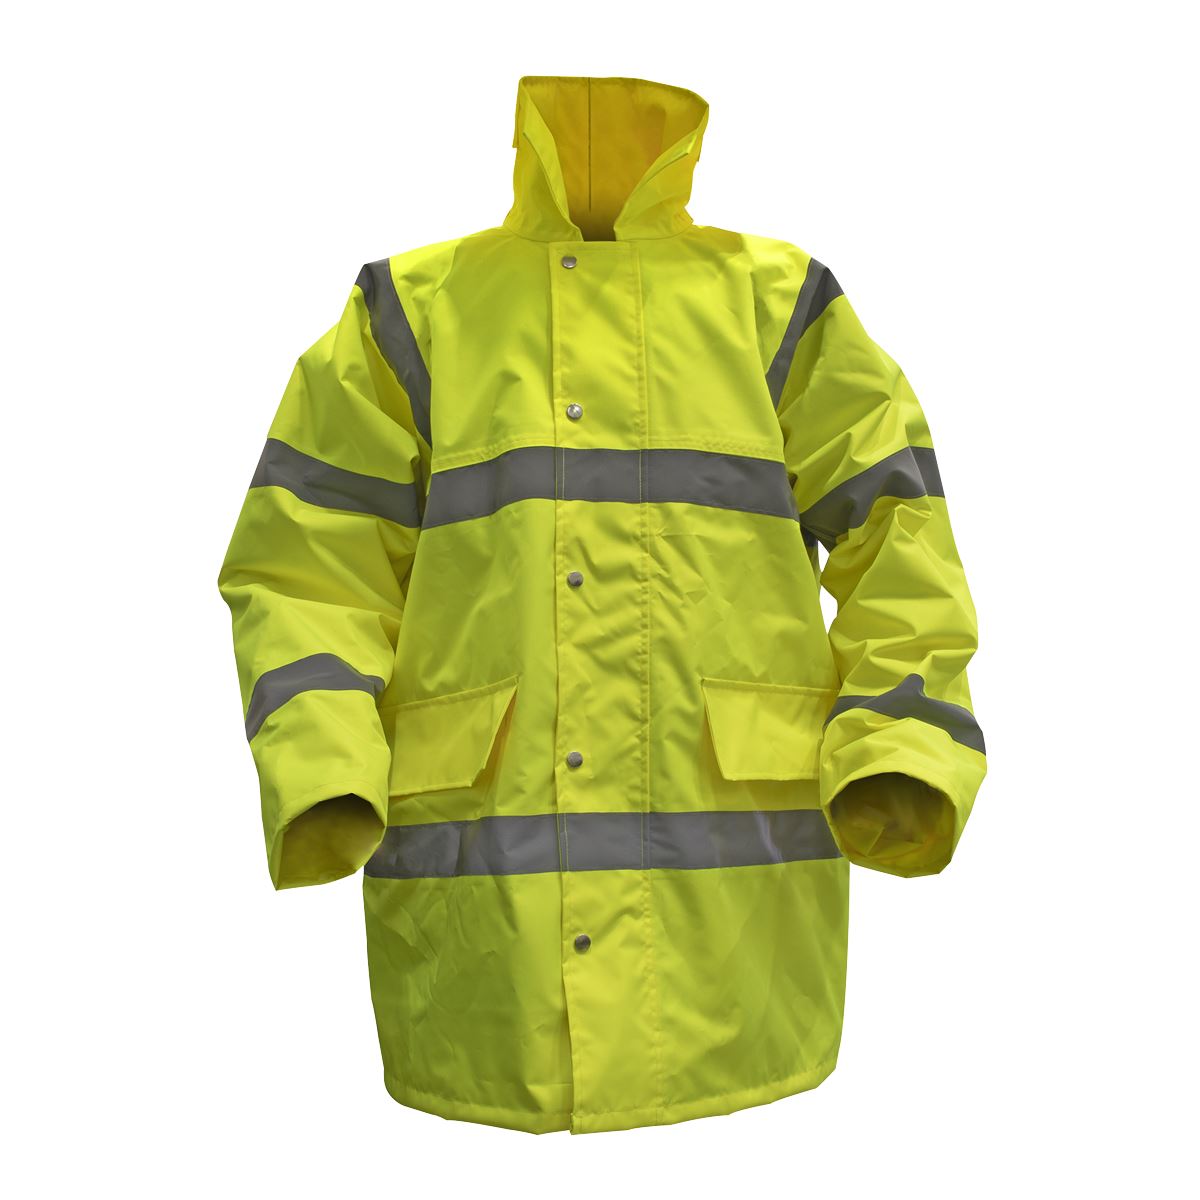 Worksafe by Sealey Hi-Vis Yellow Motorway Jacket with Quilted Lining - Large